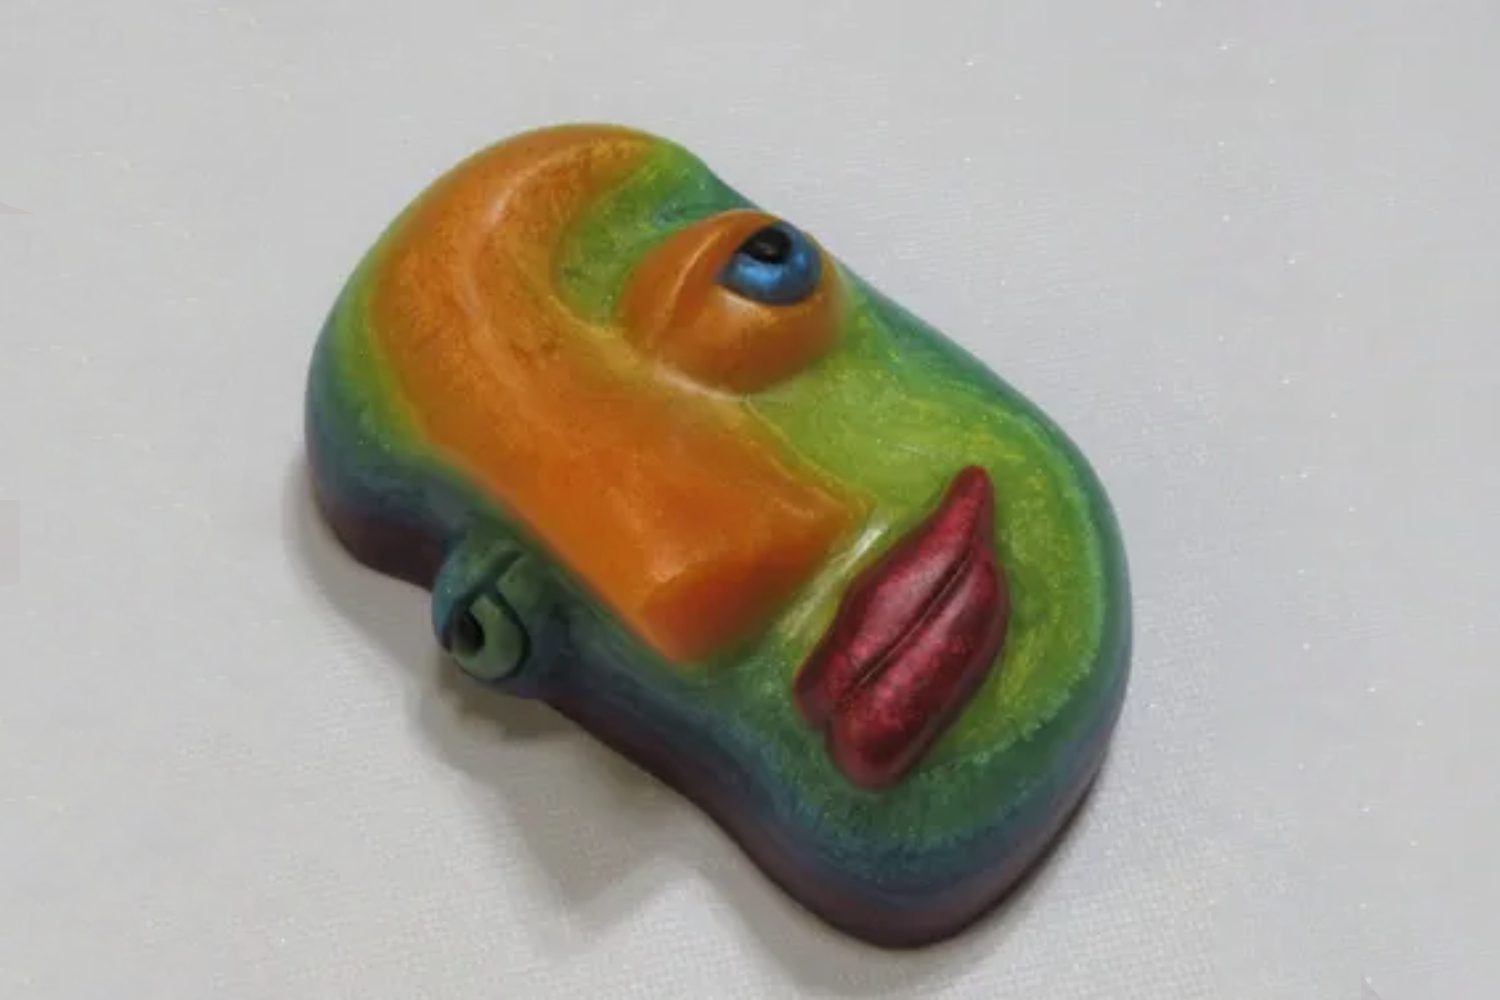 A colorful face shaped candy on top of a table.